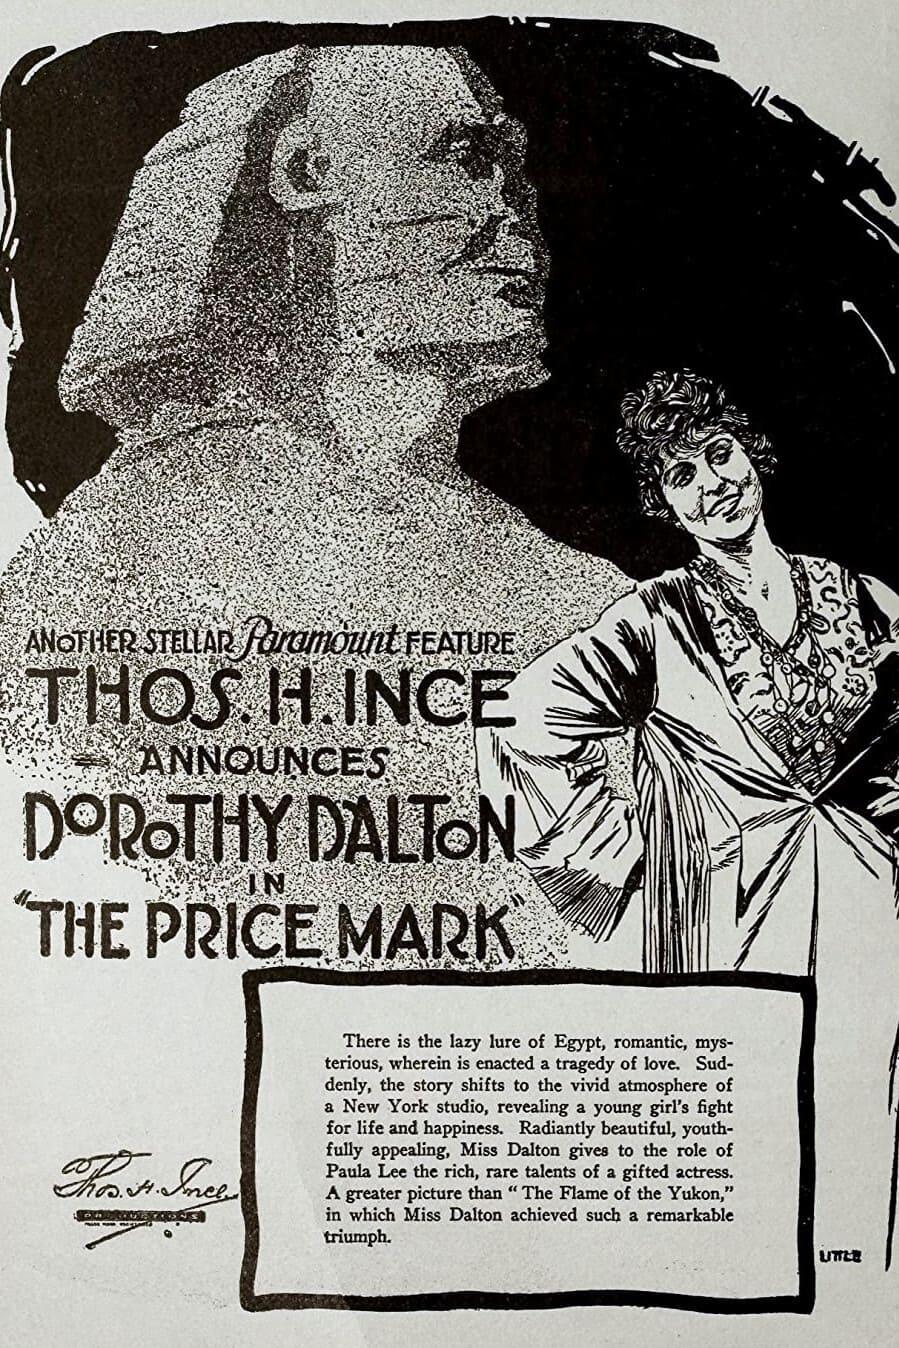 The Price Mark poster